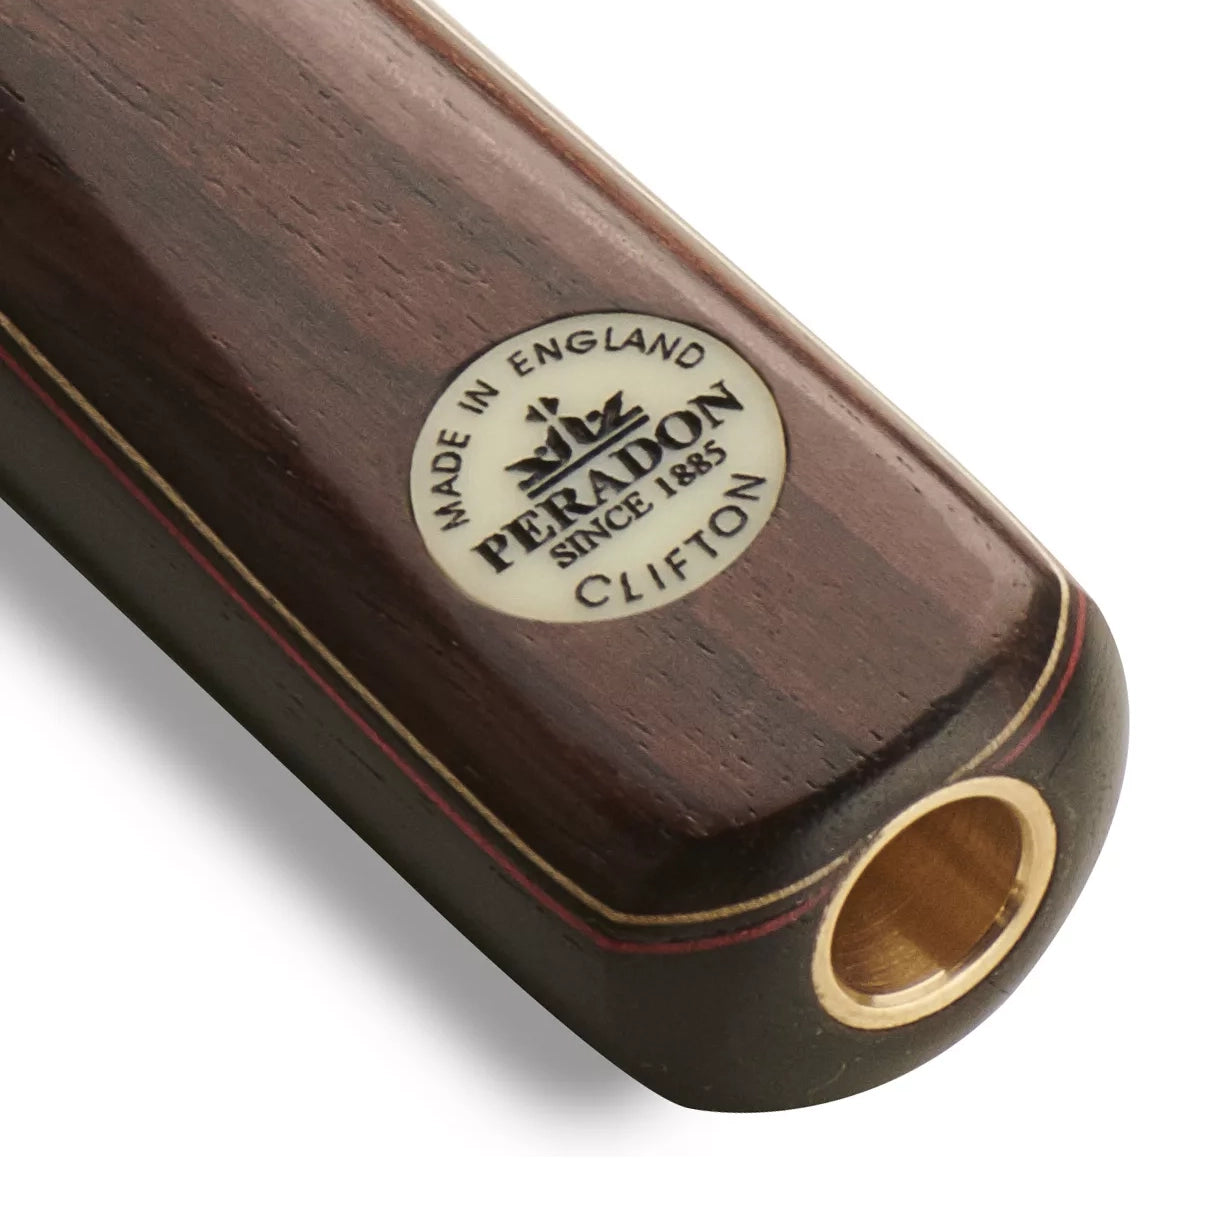 Peradon Clifton 3/4 Jointed Snooker Cue. Badge view